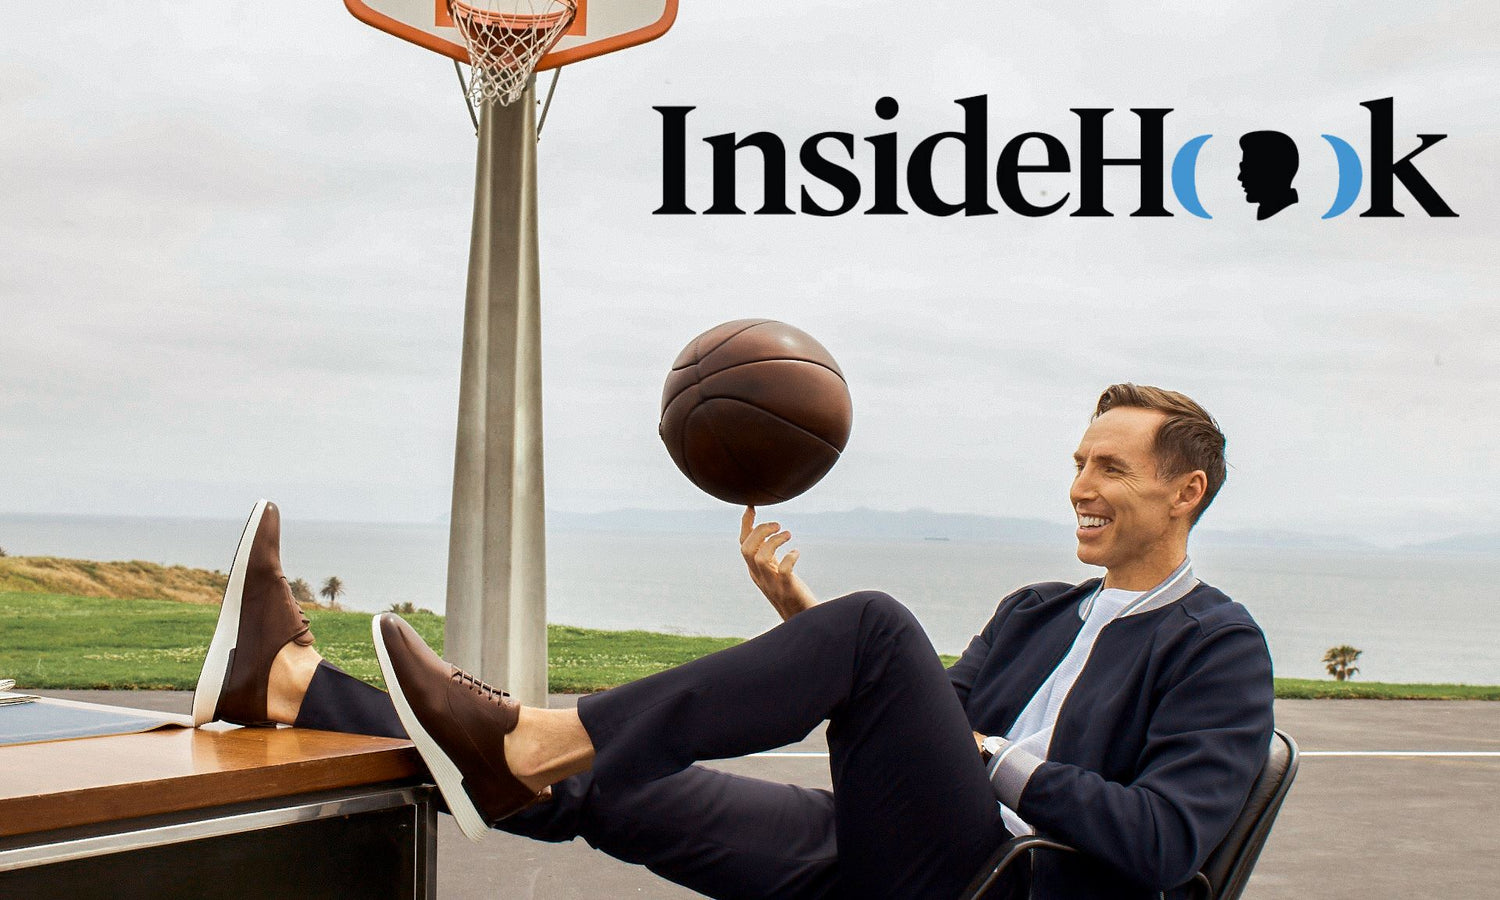 Inside Hook: What Goes Into a Dress Shoe That Steve Nash Can Hoop In?